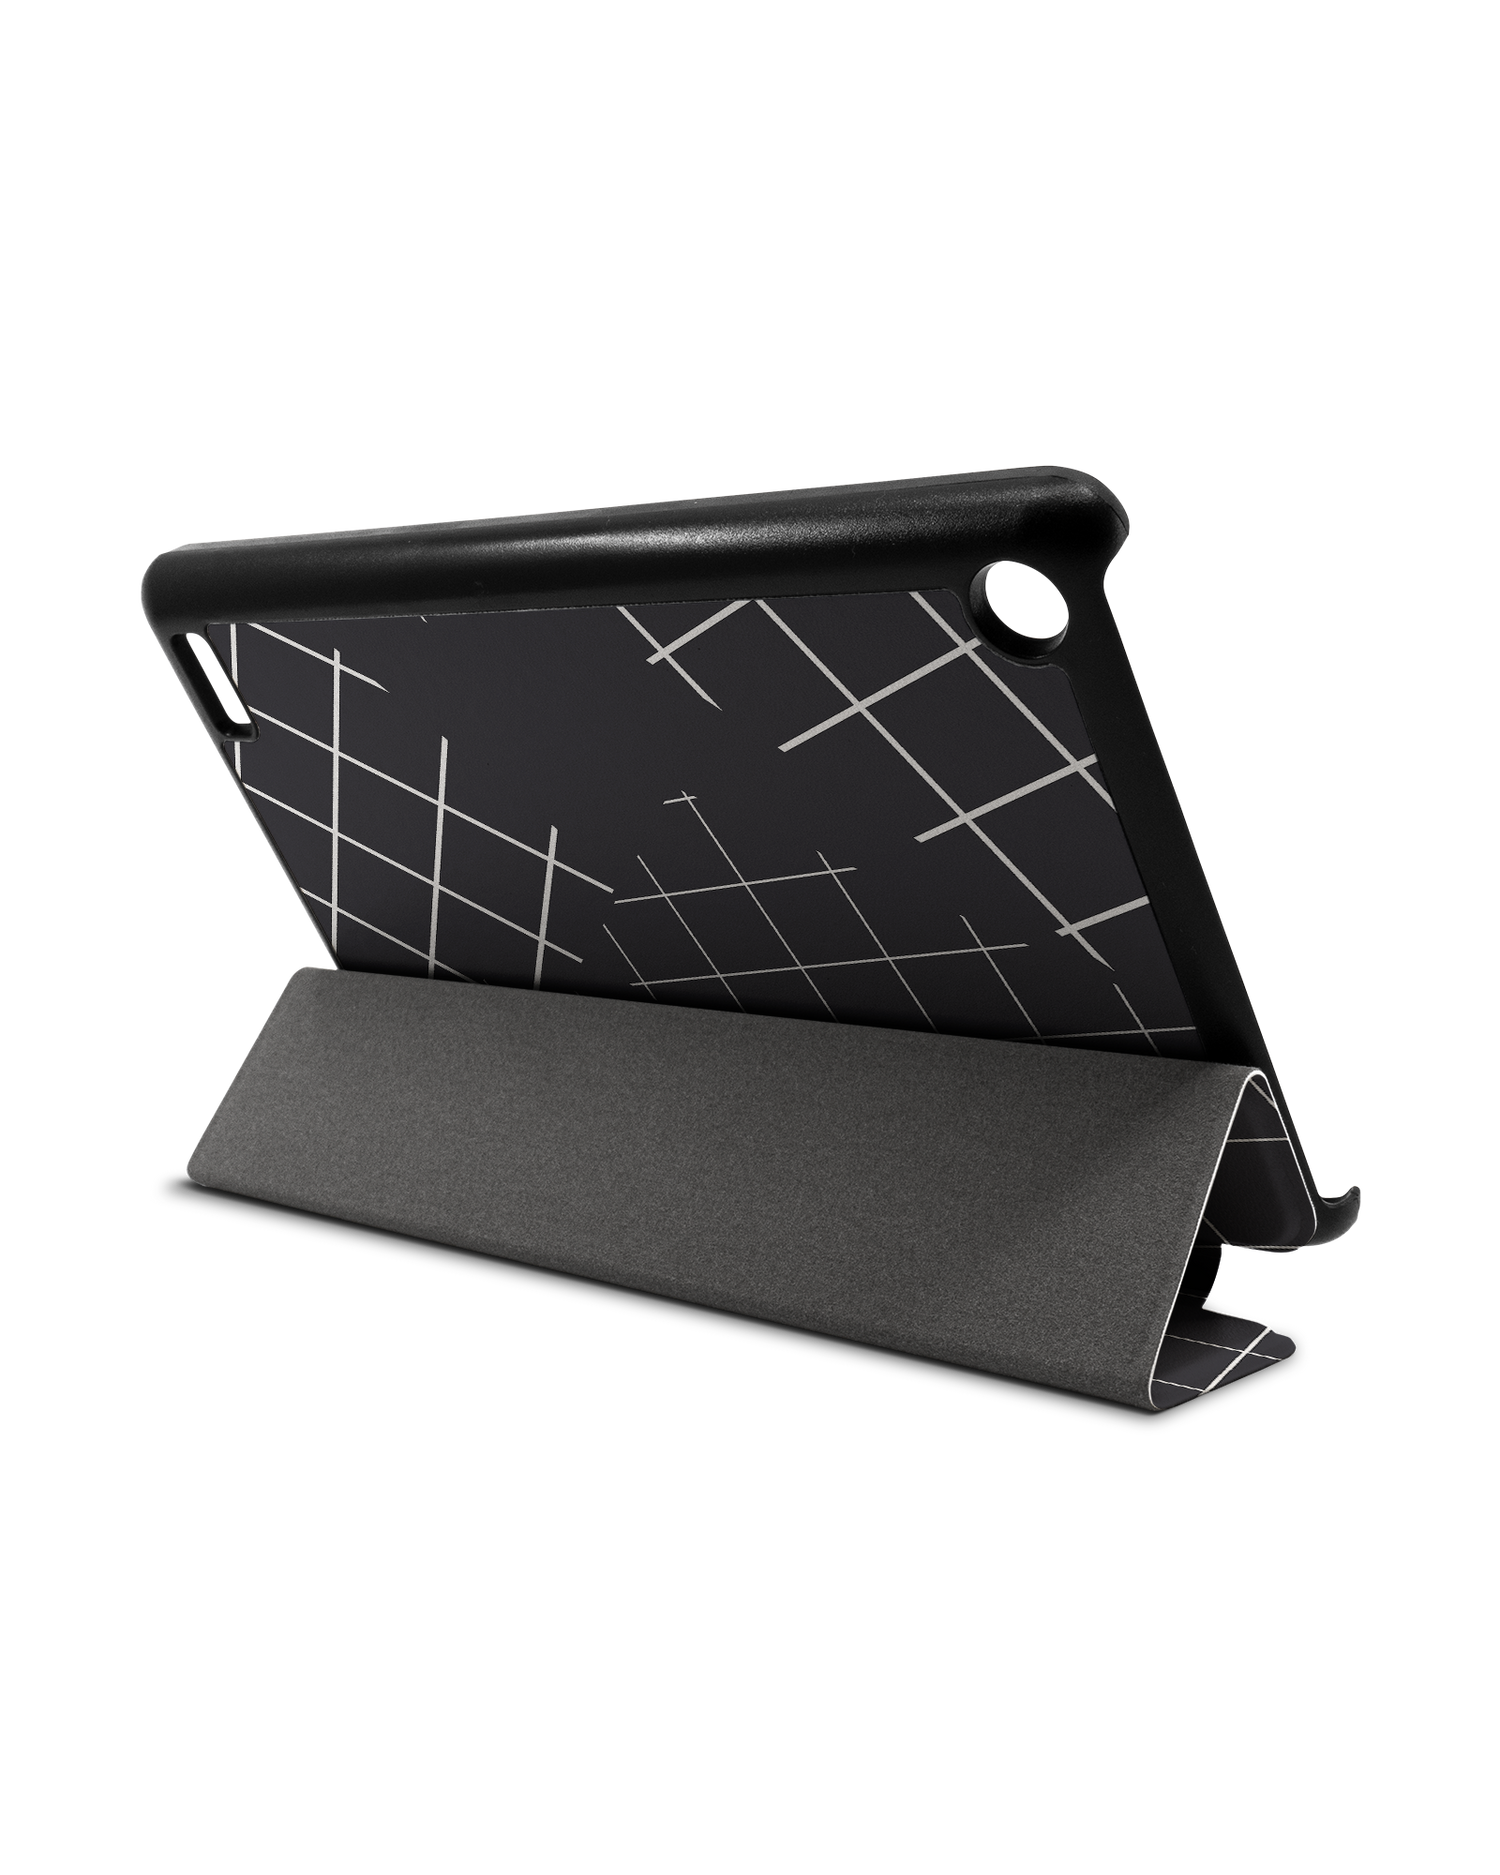 Grids Tablet Smart Case for Amazon Fire 7: Used as Stand